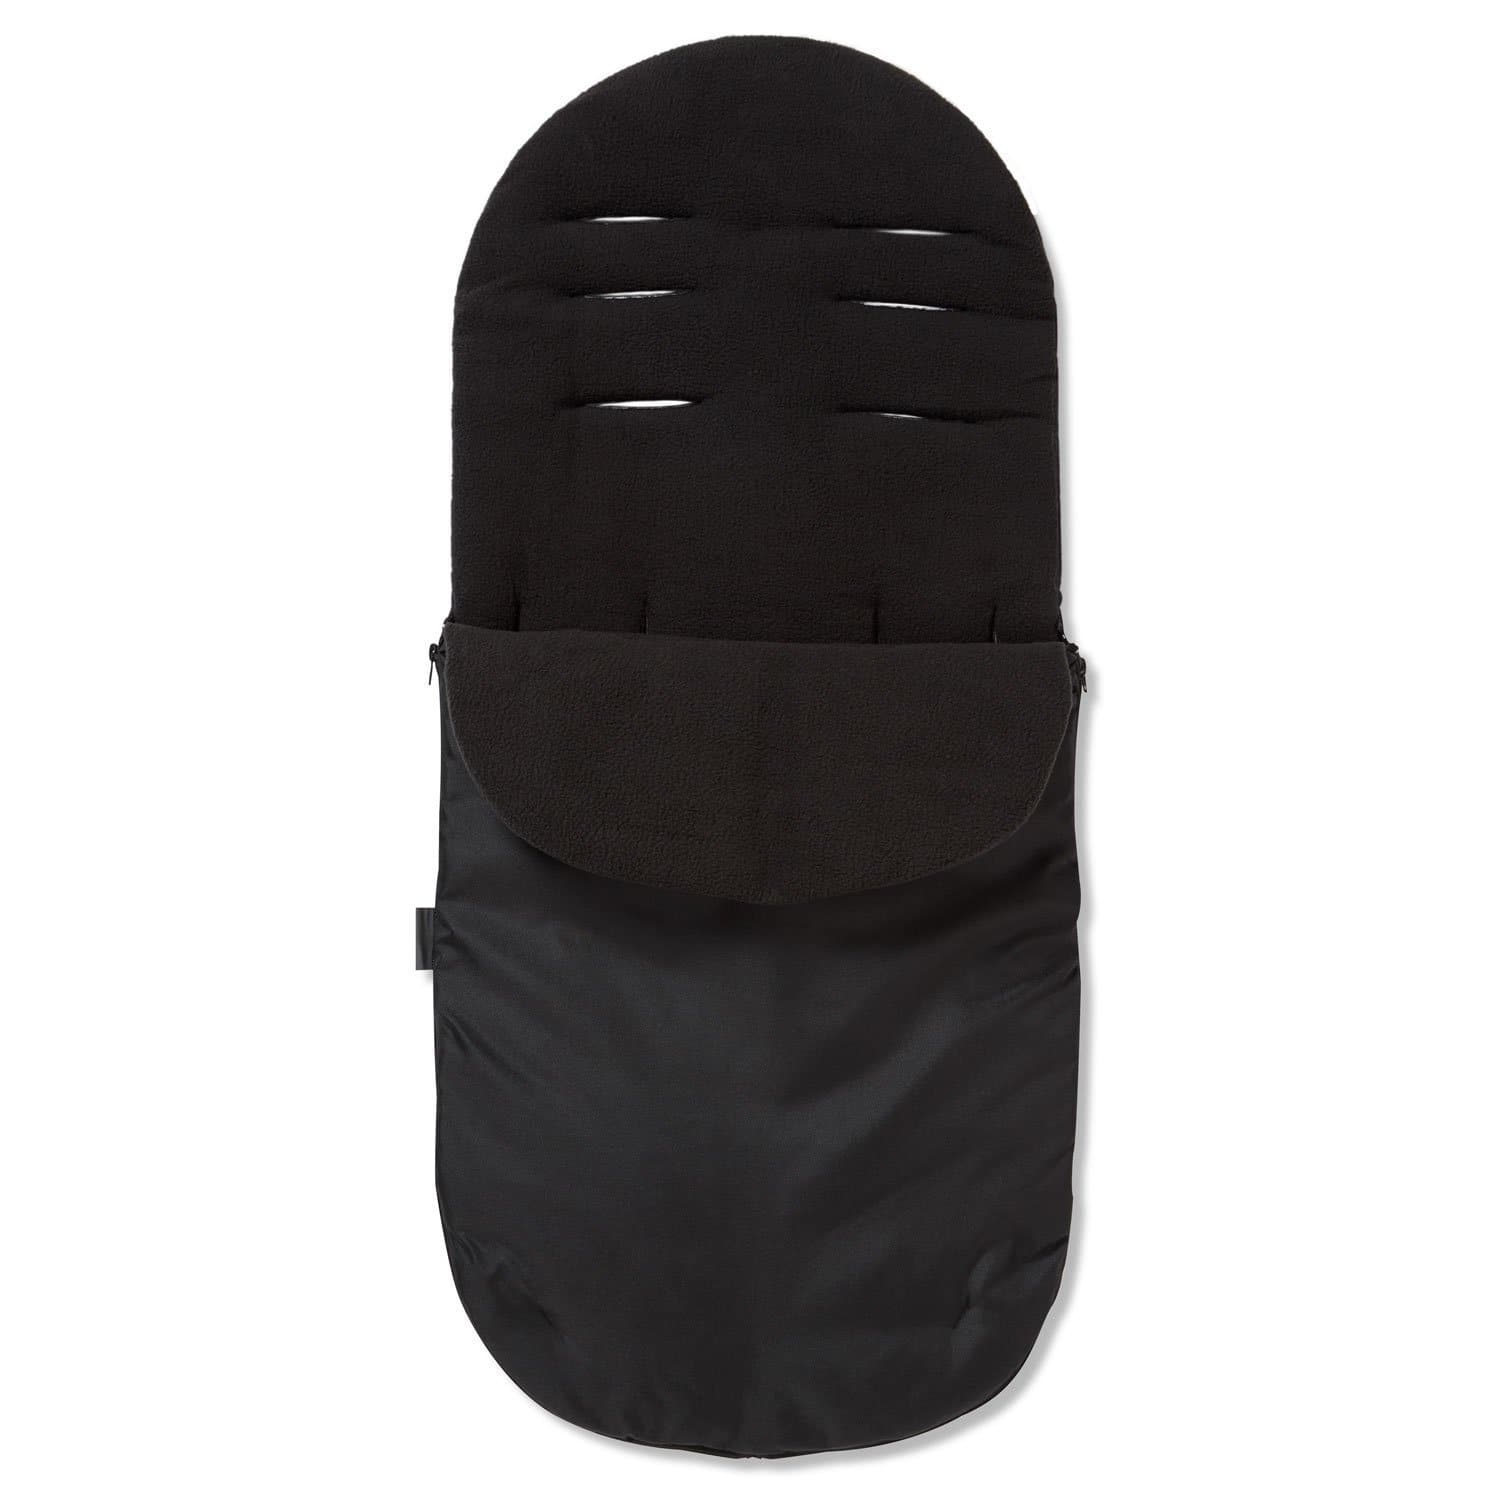 Footmuff / Cosy Toes Compatible with Maclaren - Black / Fits All Models | For Your Little One